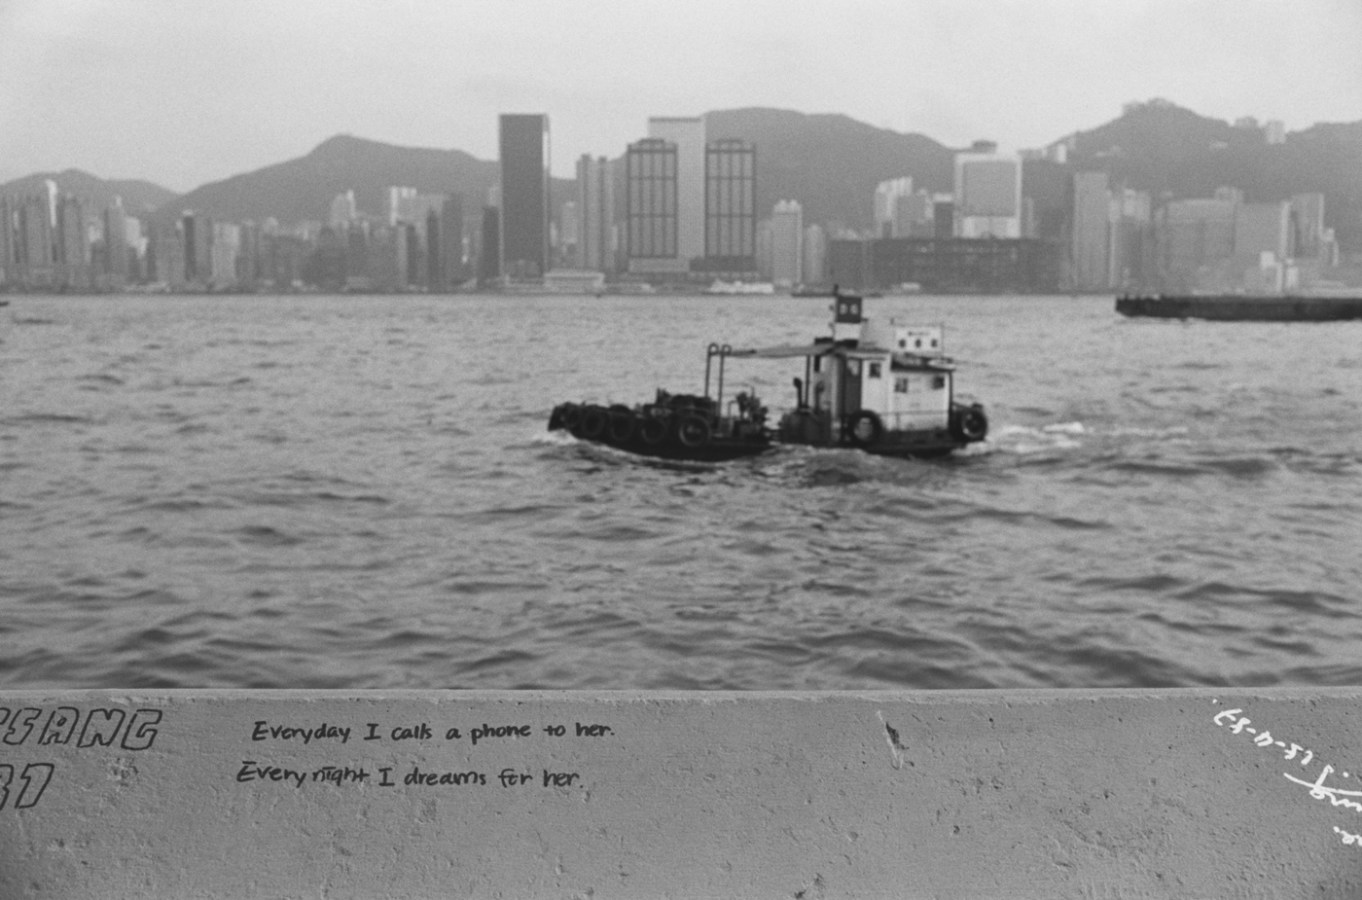 Black and white photograph with graffiti in the foreground a boat and a city skyline in the background